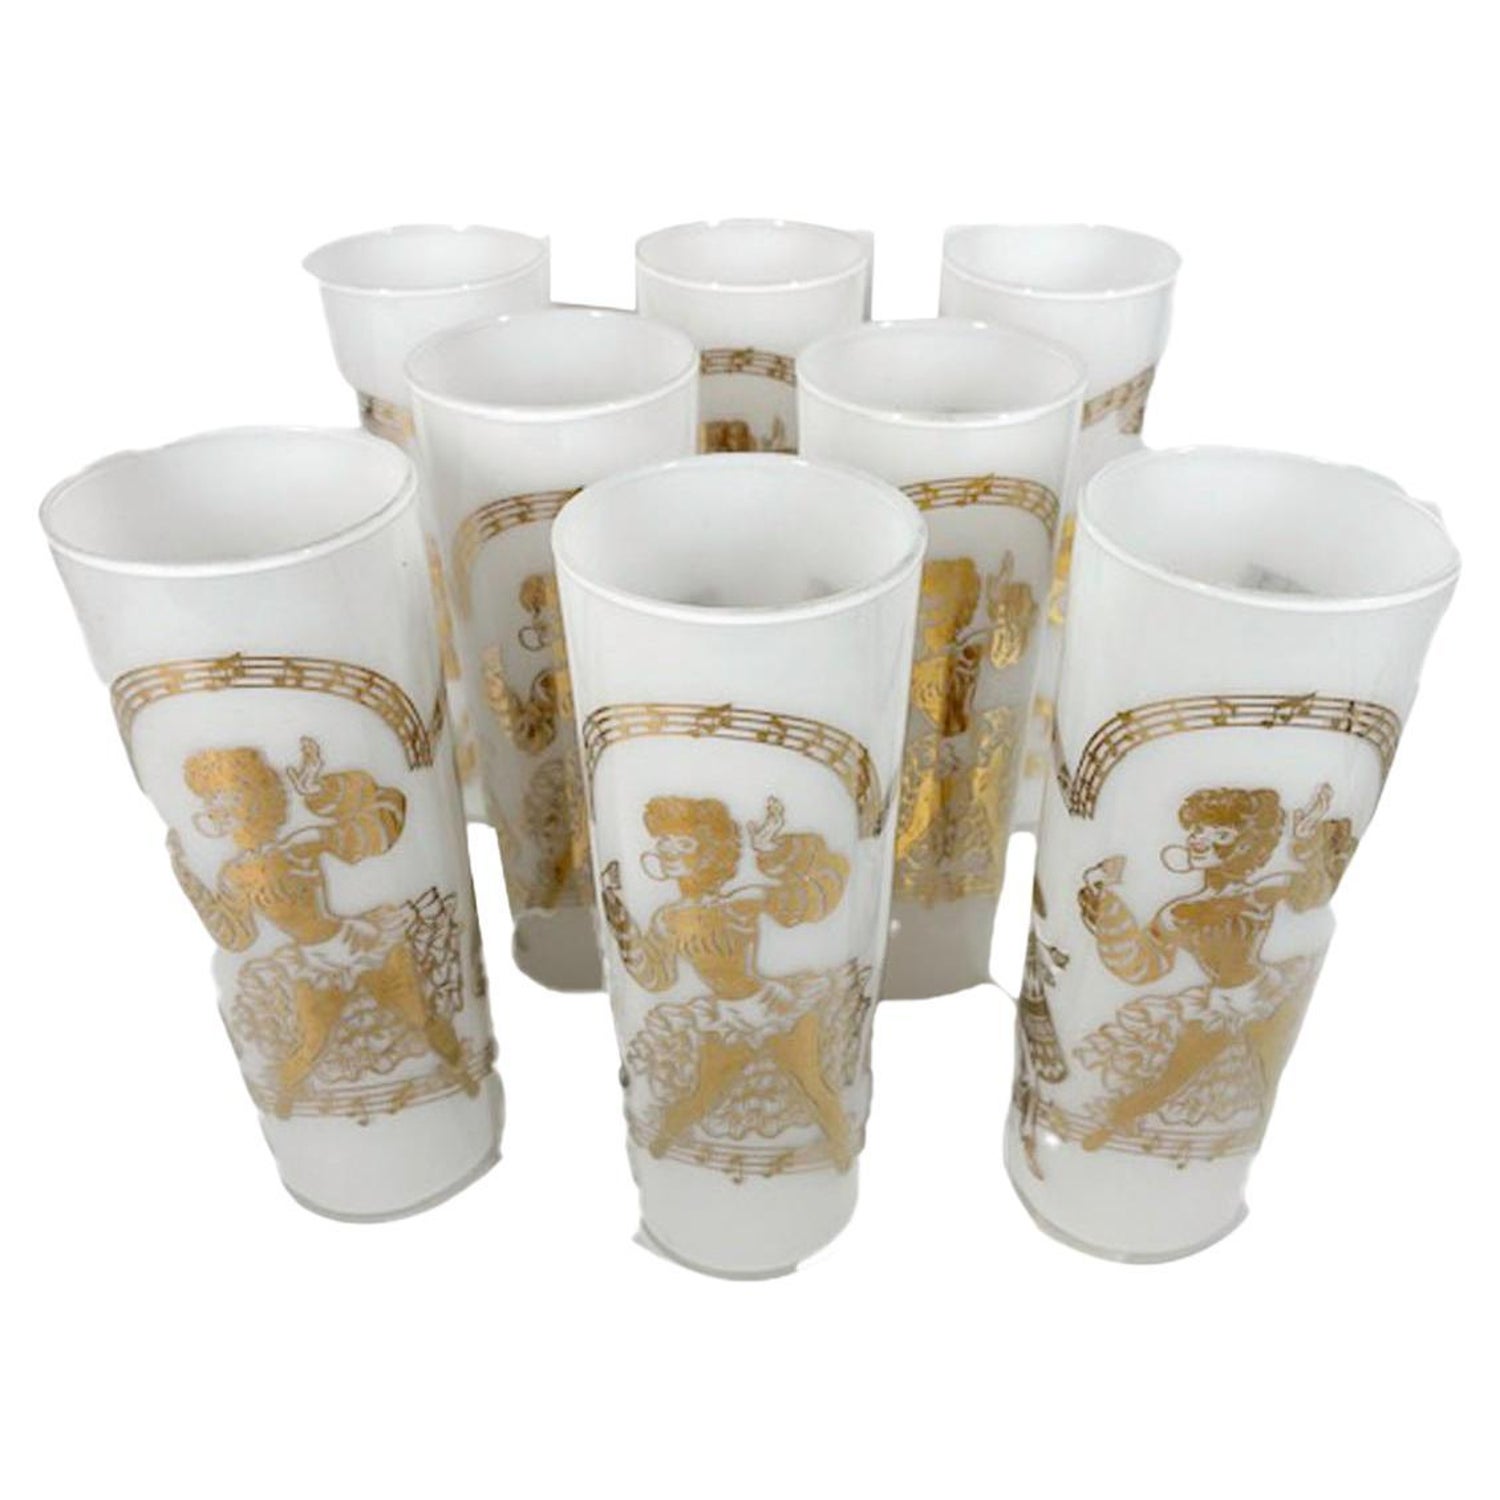 https://a.1stdibscdn.com/eight-vintage-calypso-pattern-tom-collins-glasses-by-federal-glassware-for-sale/f_13752/f_278520521647621720816/f_27852052_1647621721110_bg_processed.jpg?width=1500